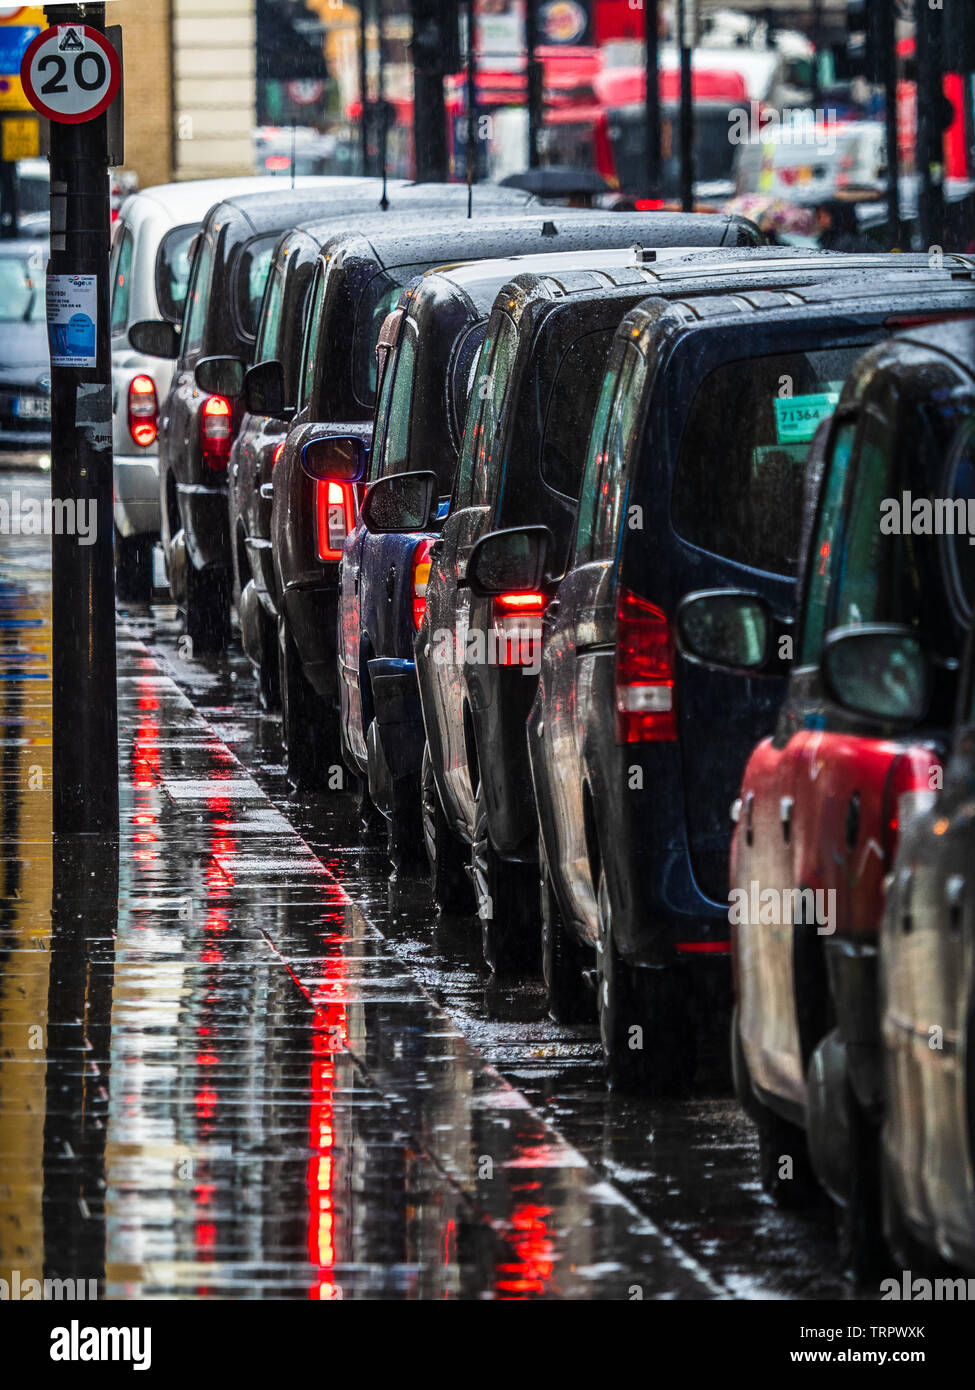 London Taxis in the Rain - a queue of London Black Cabs waiting for passengers in the pouring rain Stock Photo